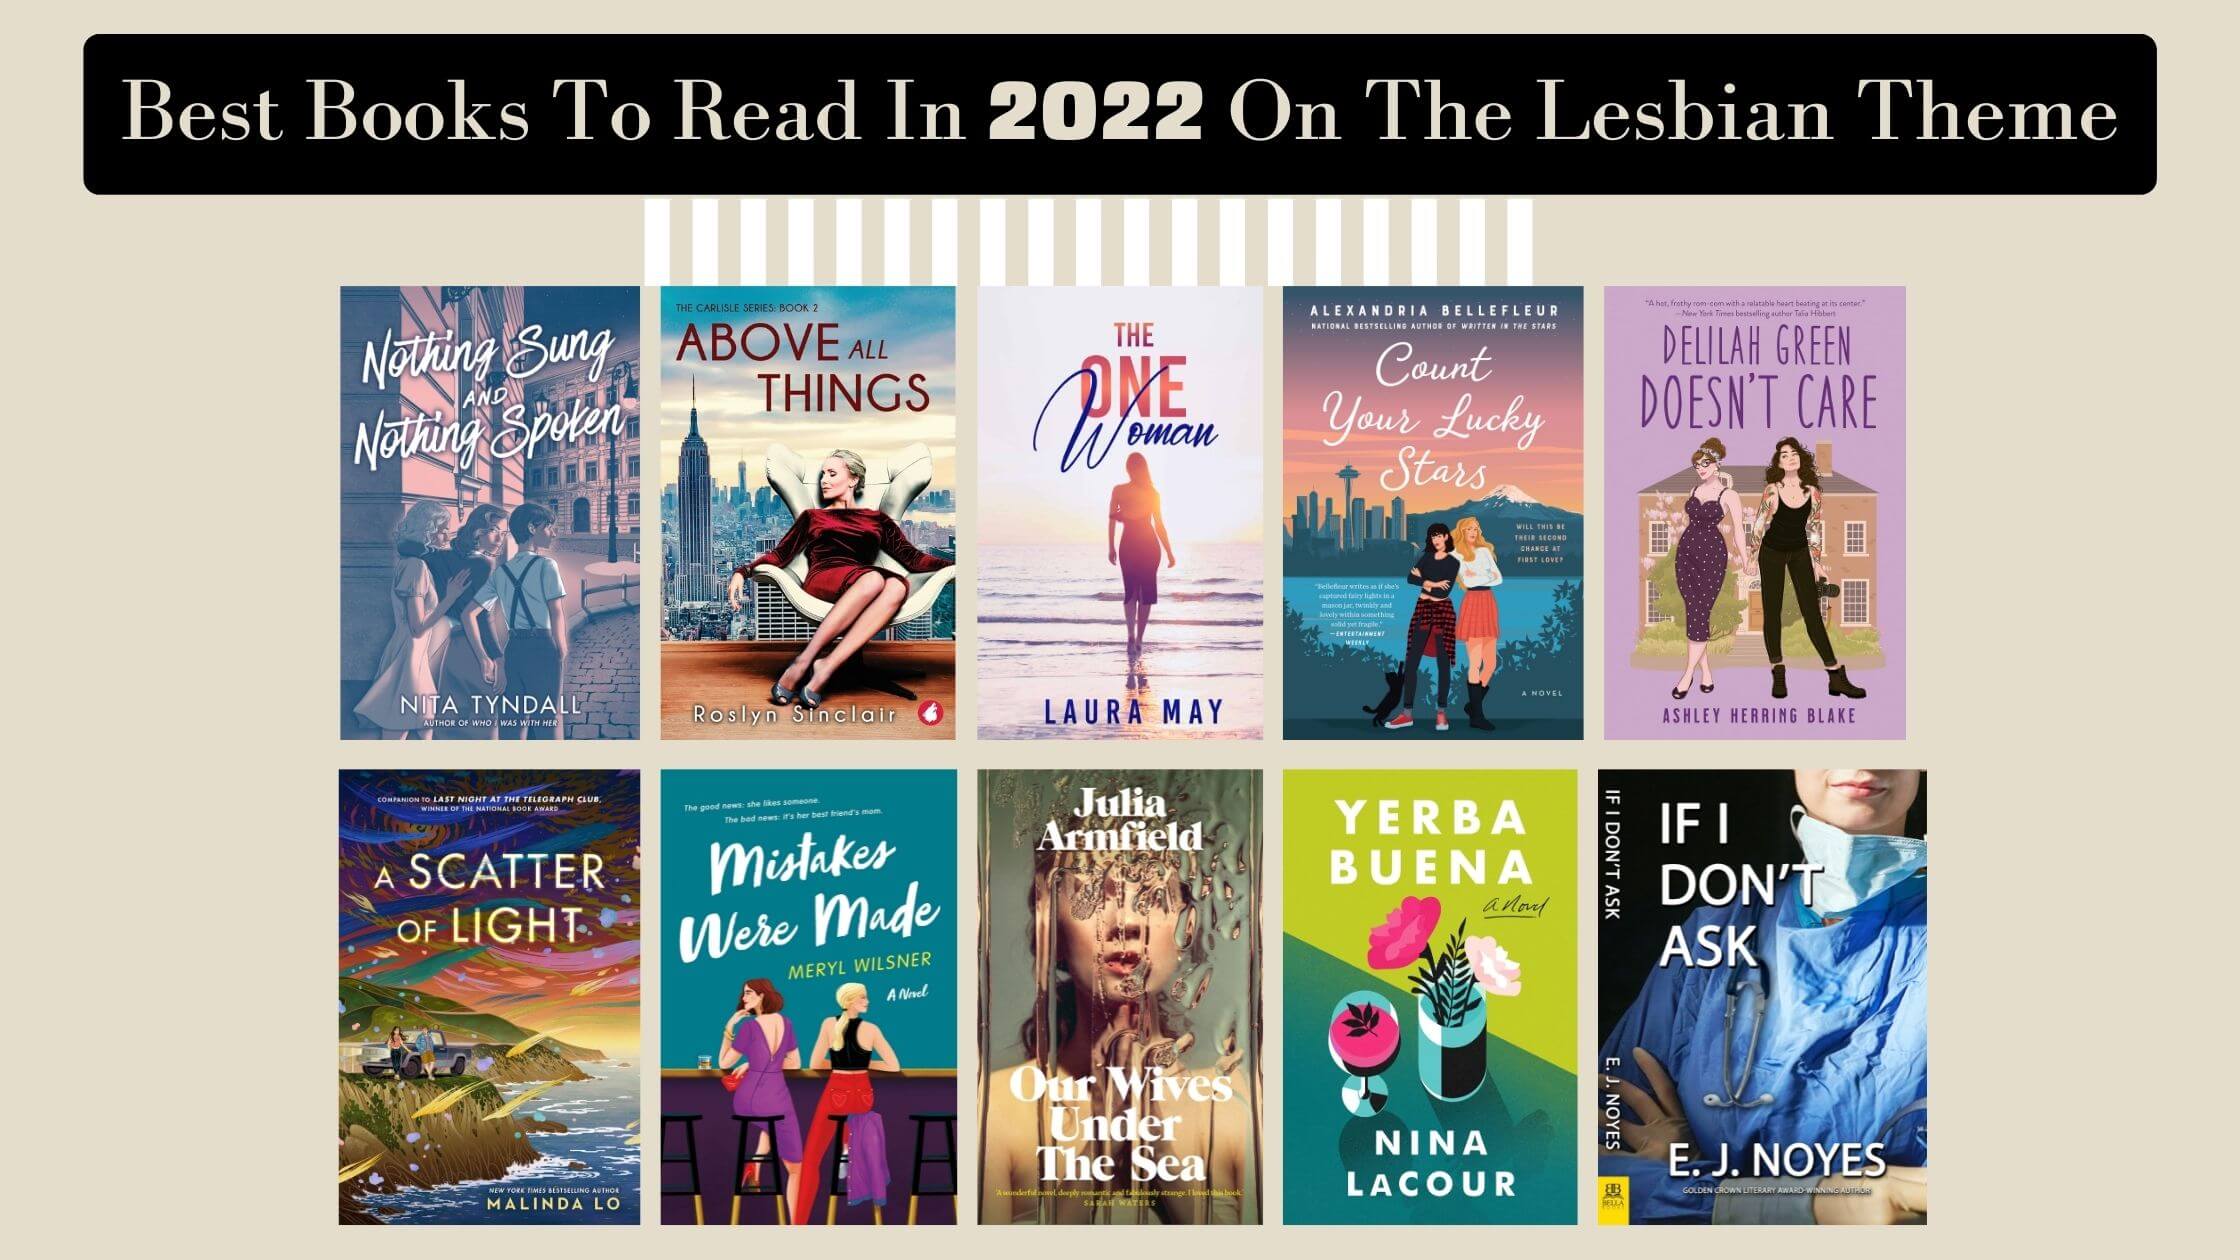 Best Books To Read In 2022 On The Lesbian Theme